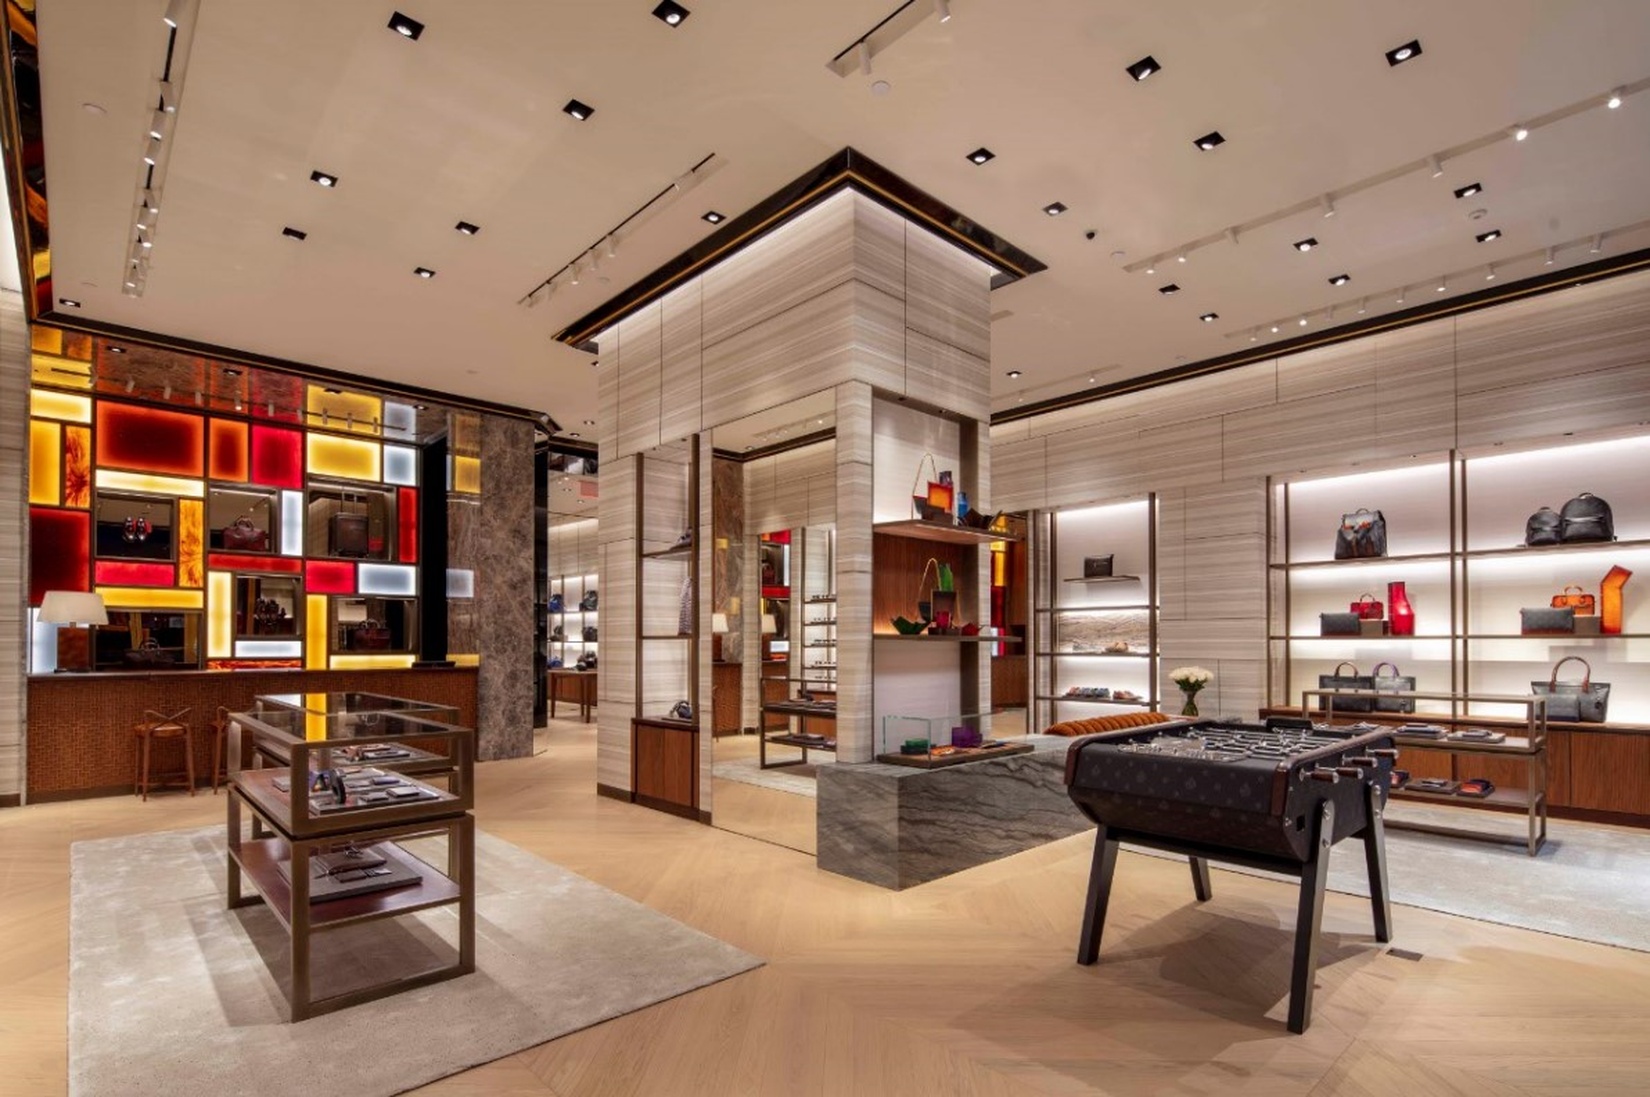 BERLUTI New York: bespoke shoes and leather goods in New York